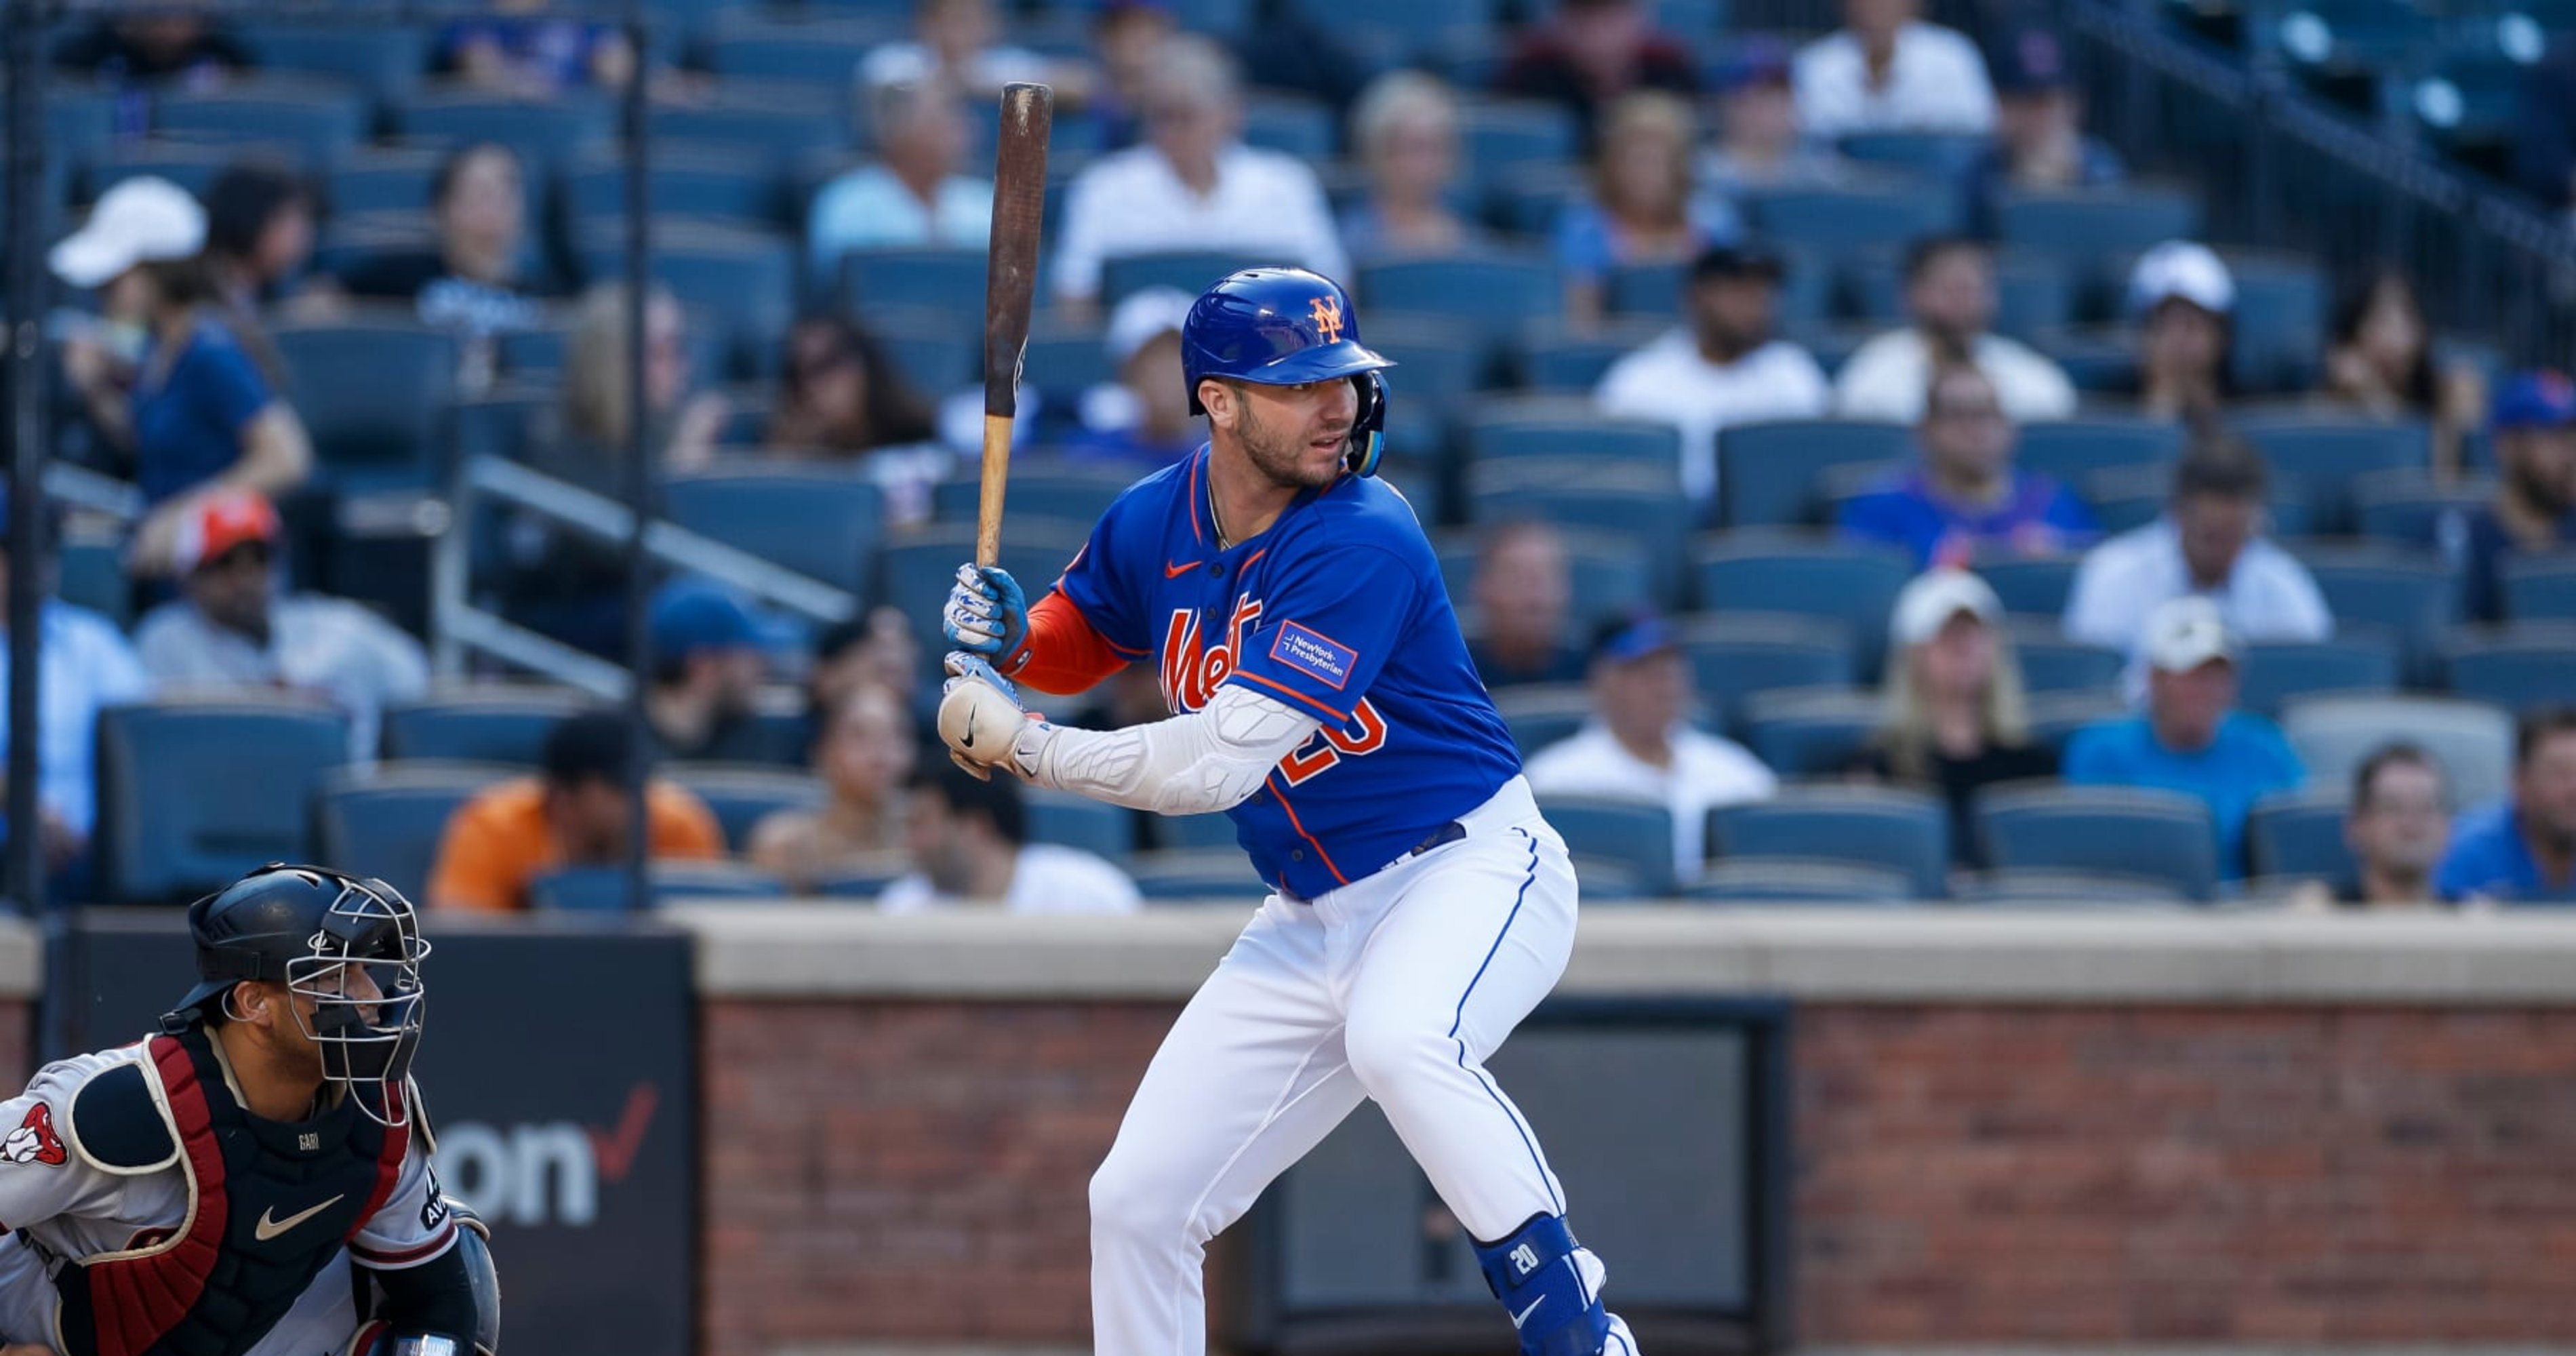 Report indicates Brewers made push to acquire Mets slugger Pete Alonso